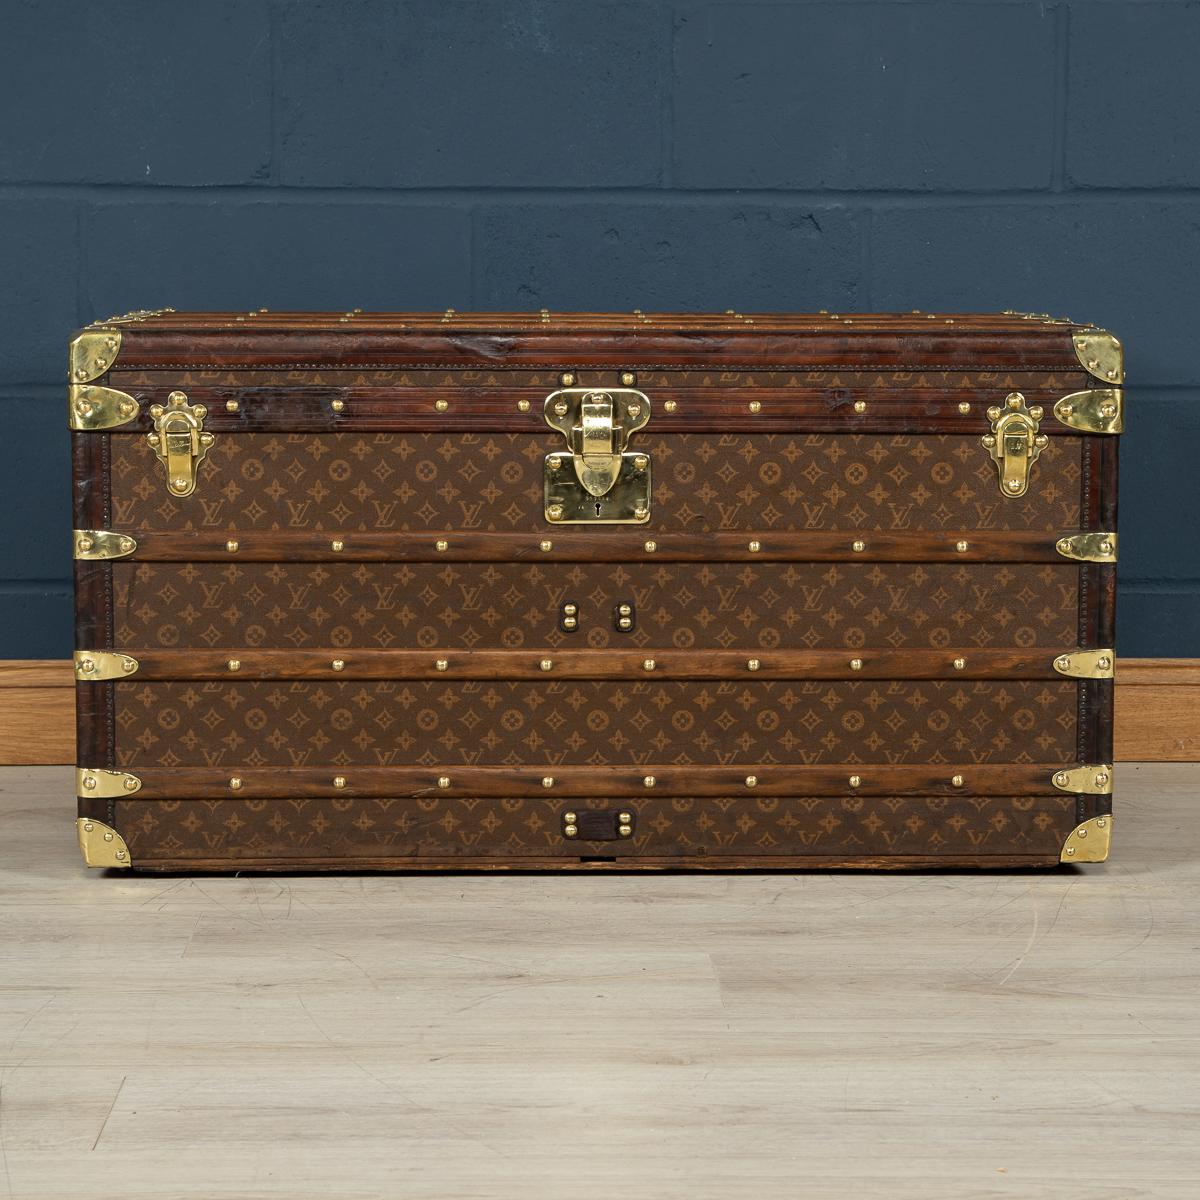 Stunning early 20th century Louis Vuitton trunk was the must have item of any elite traveler. Covered in the world famous LV monogrammed canvas, with its lozine borders and brass fitting it would have been the top of the line even at the time of